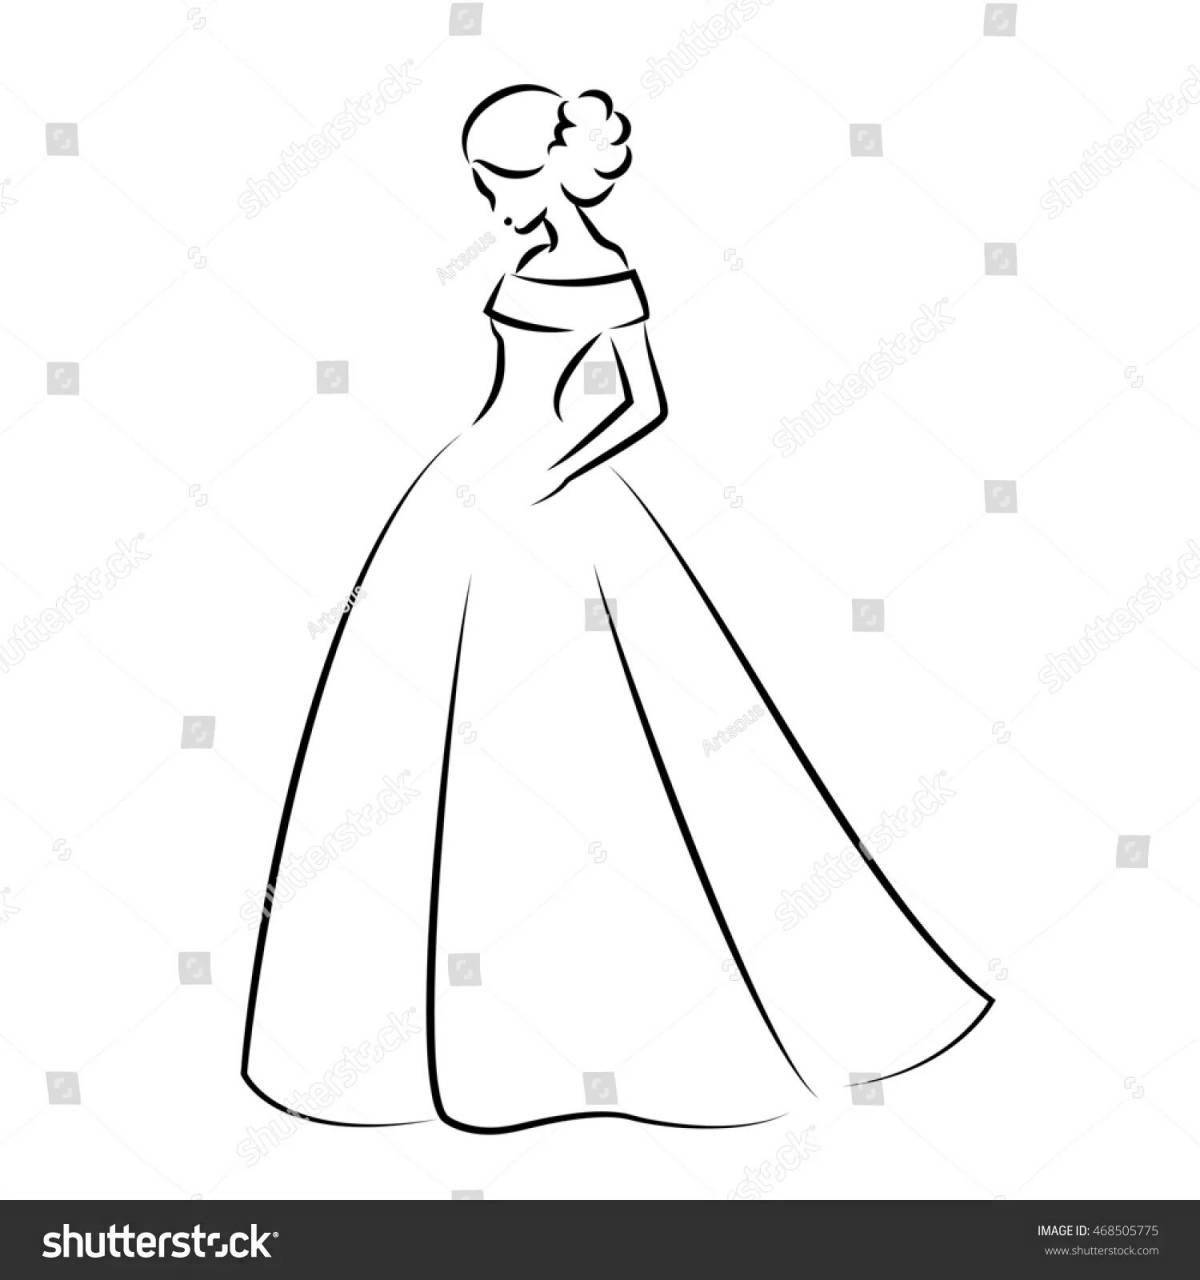 Royal coloring silhouette of a girl in a dress